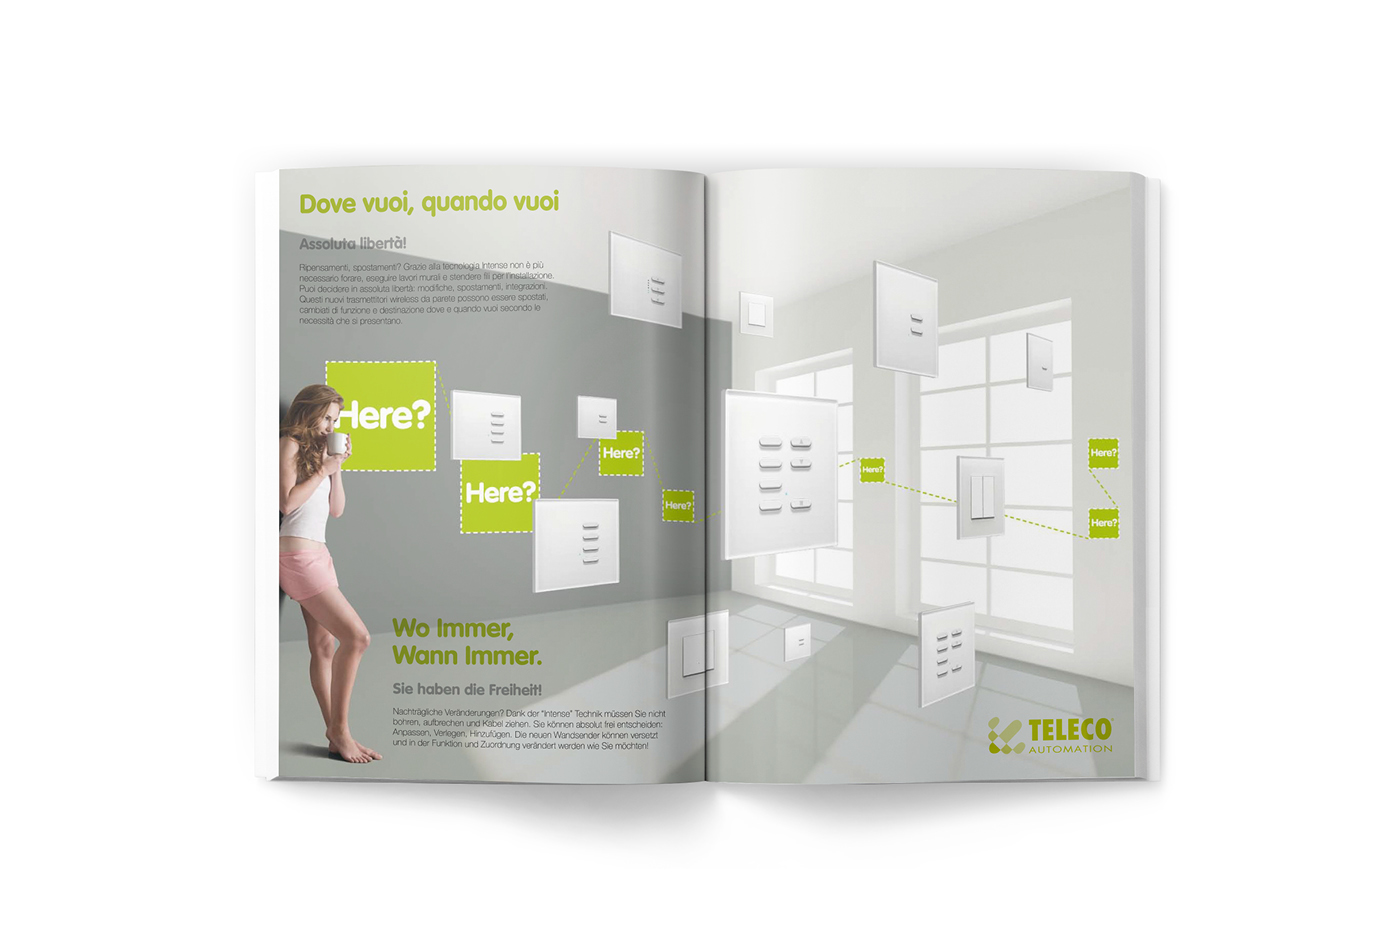 Teleco automation automation Domotic light wireless electrical brochure book editorial design  catalog